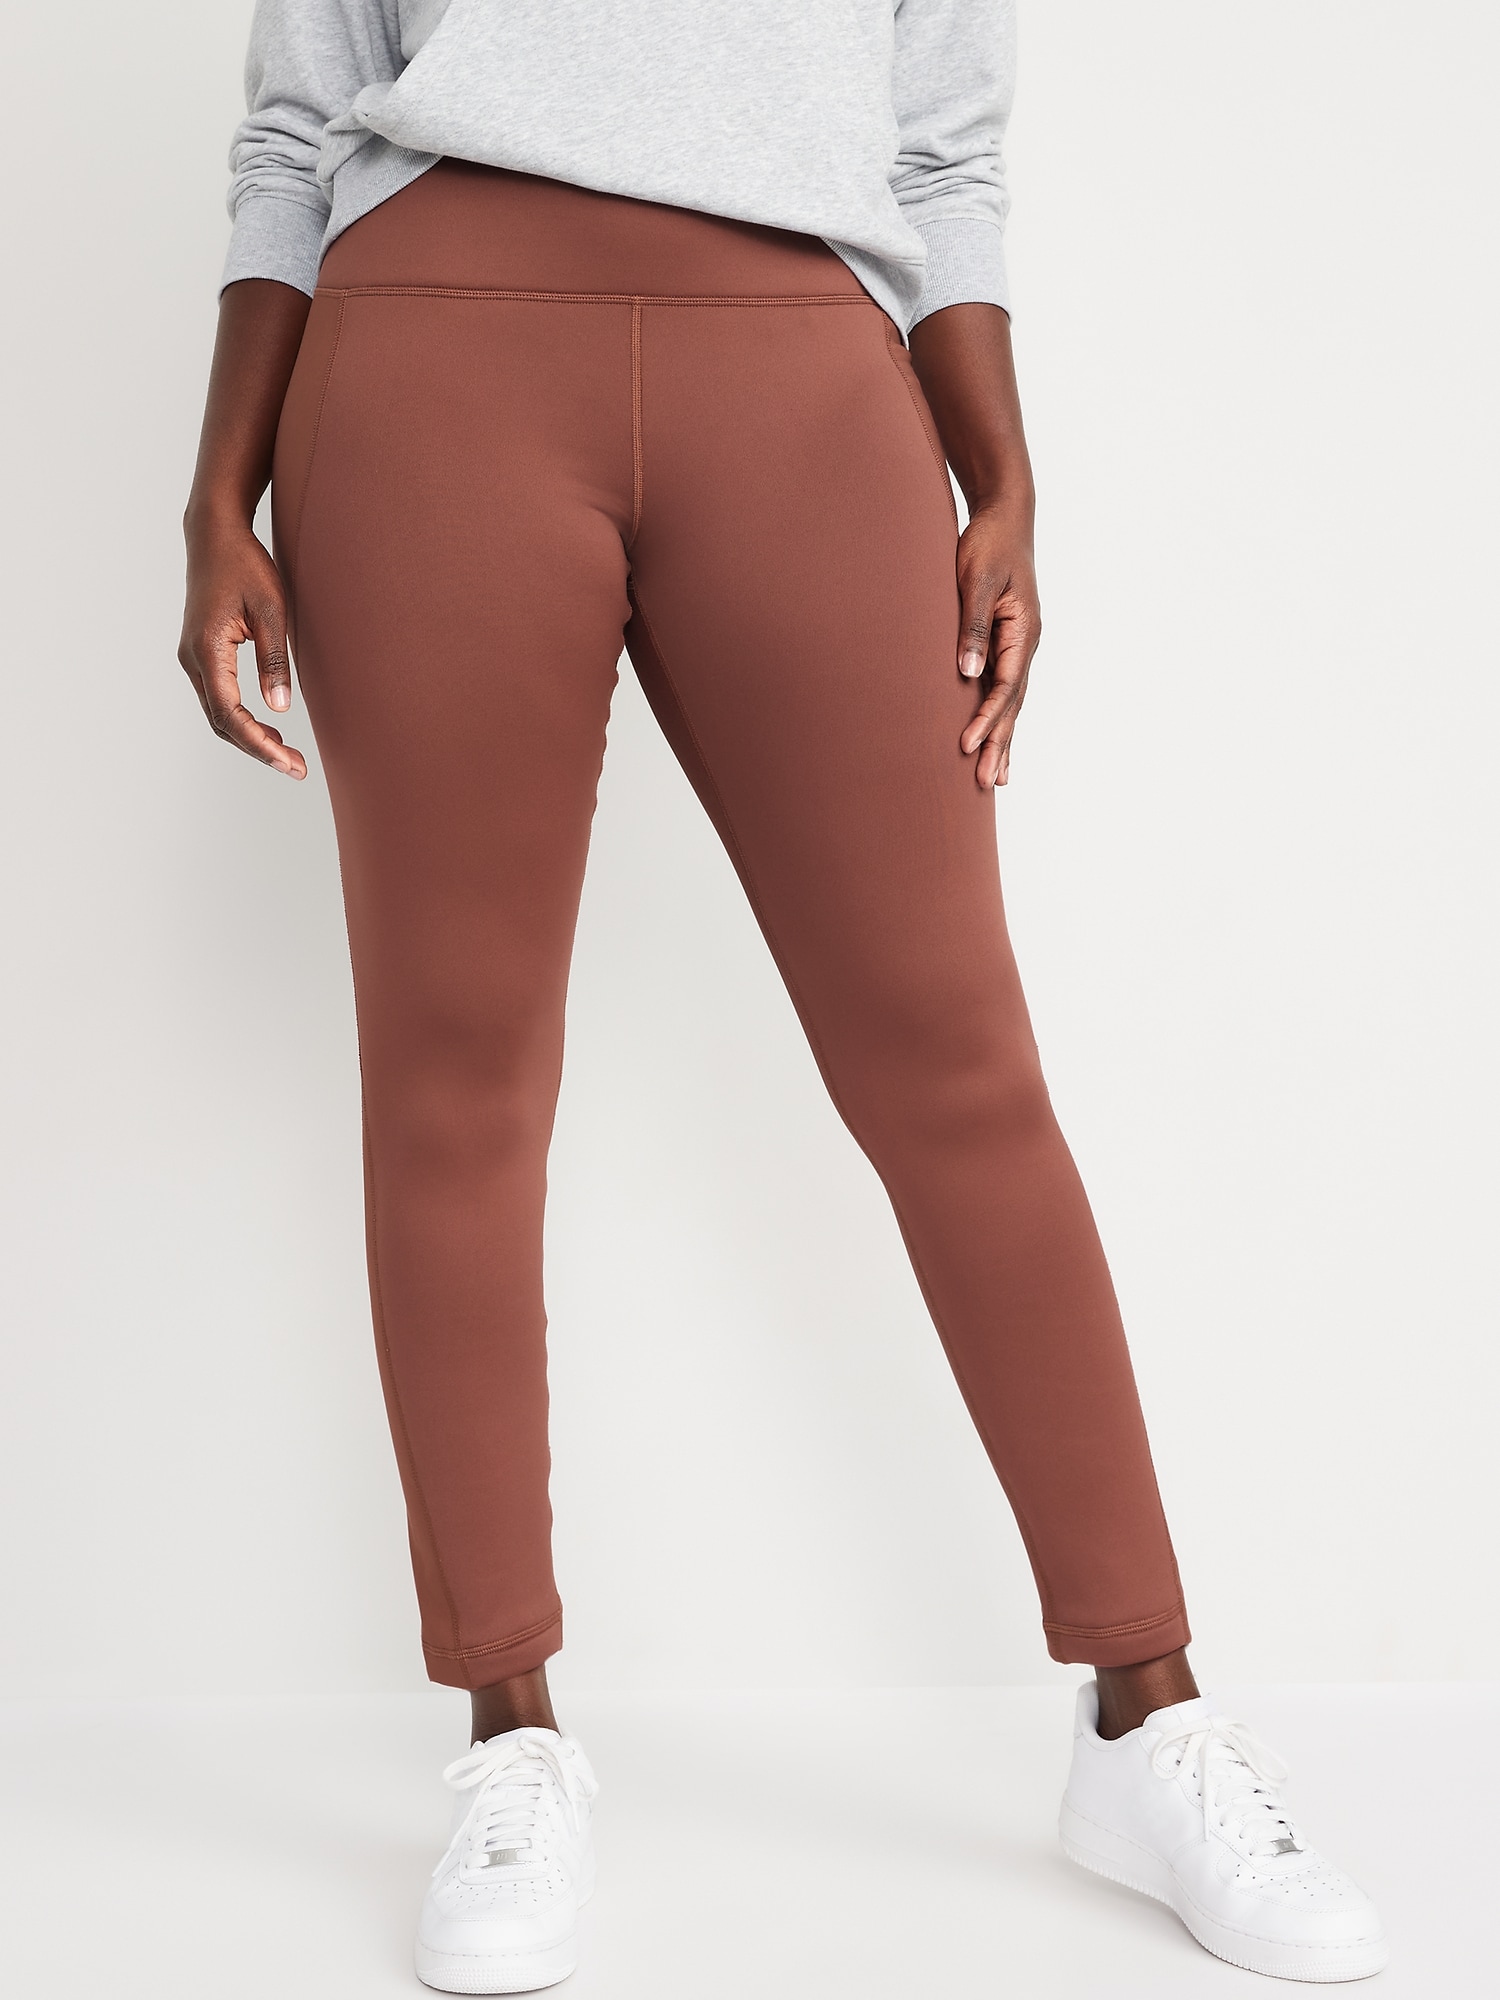 Conceited Fleece Lined Leggings Black Size 4 - $13 (48% Off Retail) - From  Anne